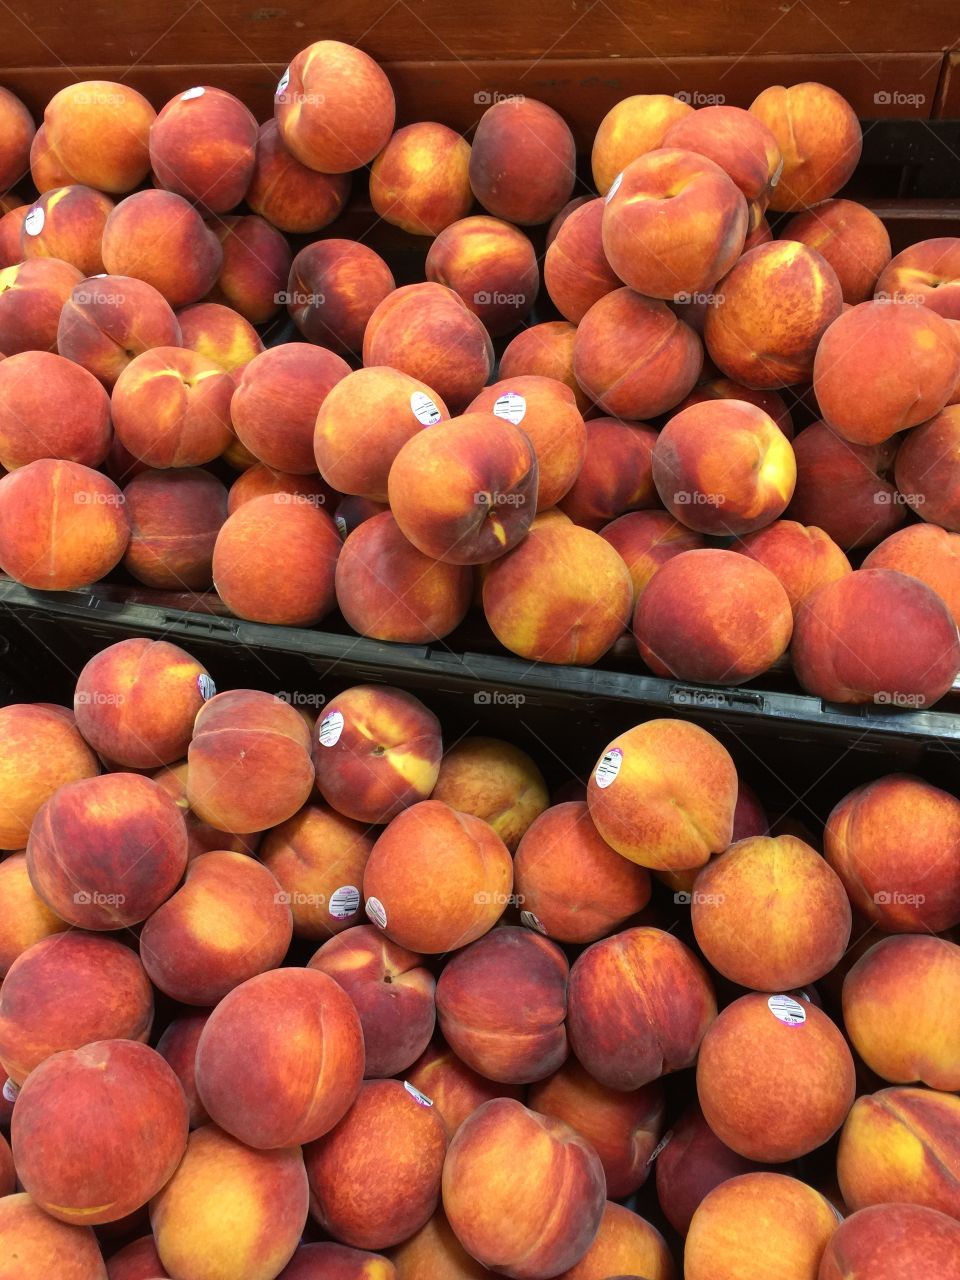 Southern peaches